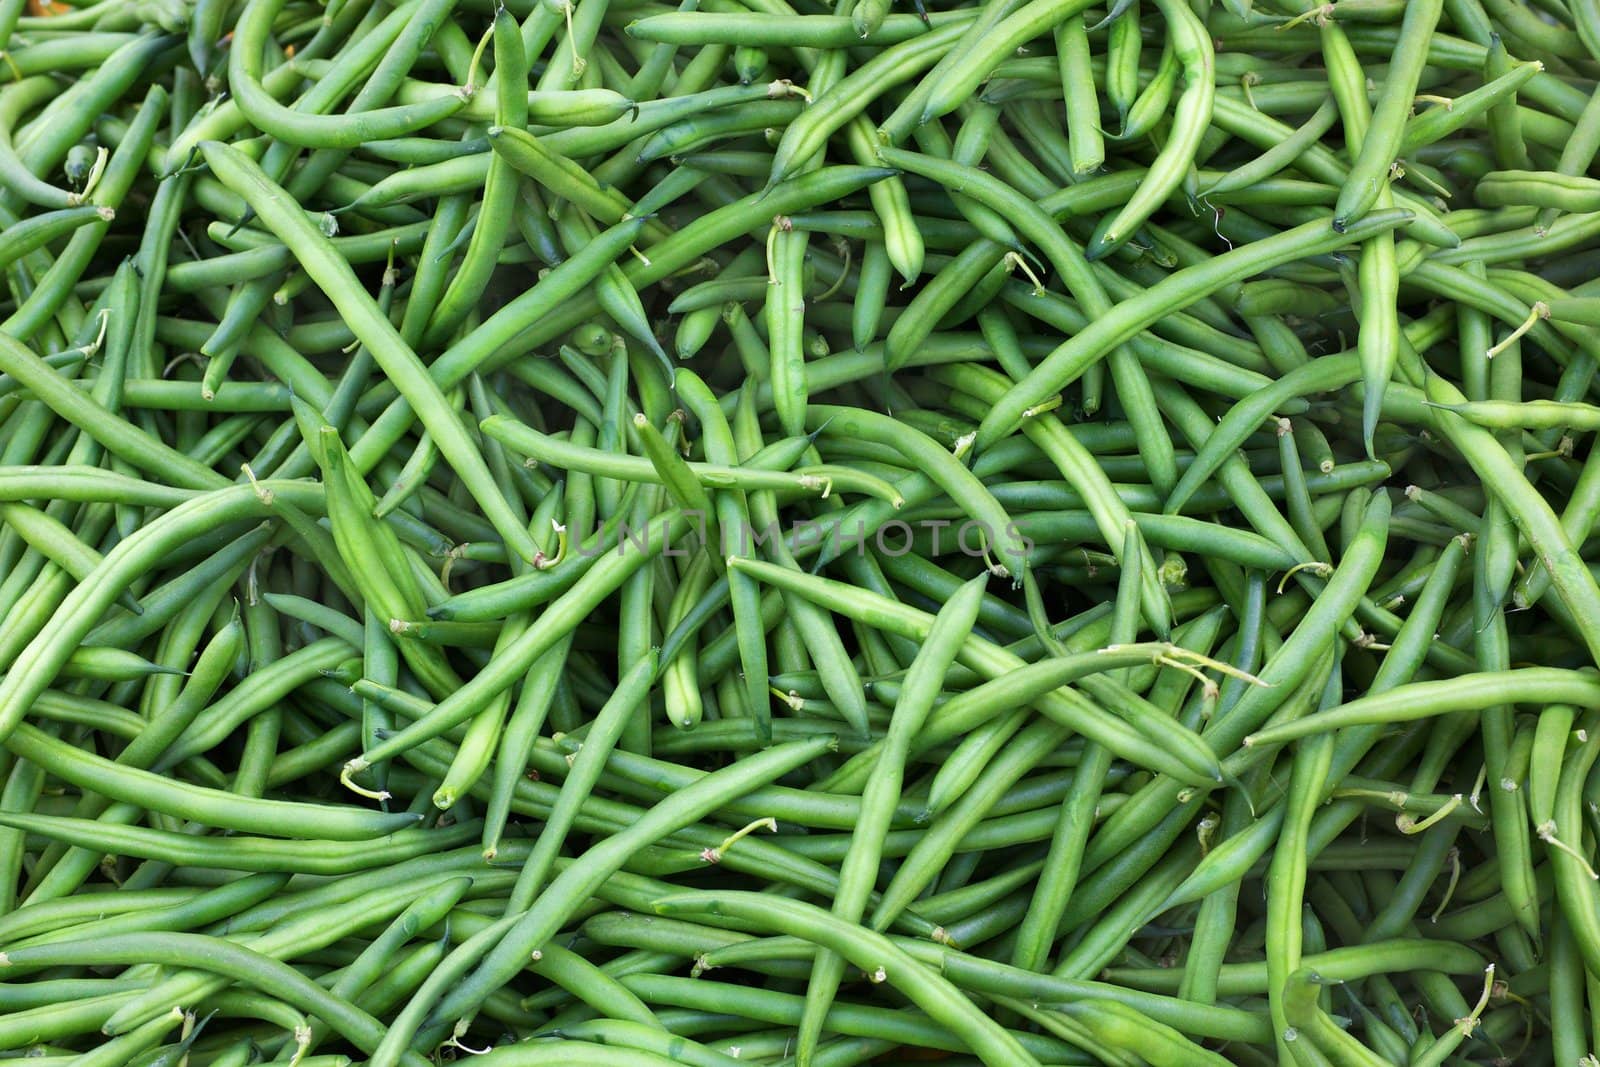 Big pile of green string beans at the farmers market